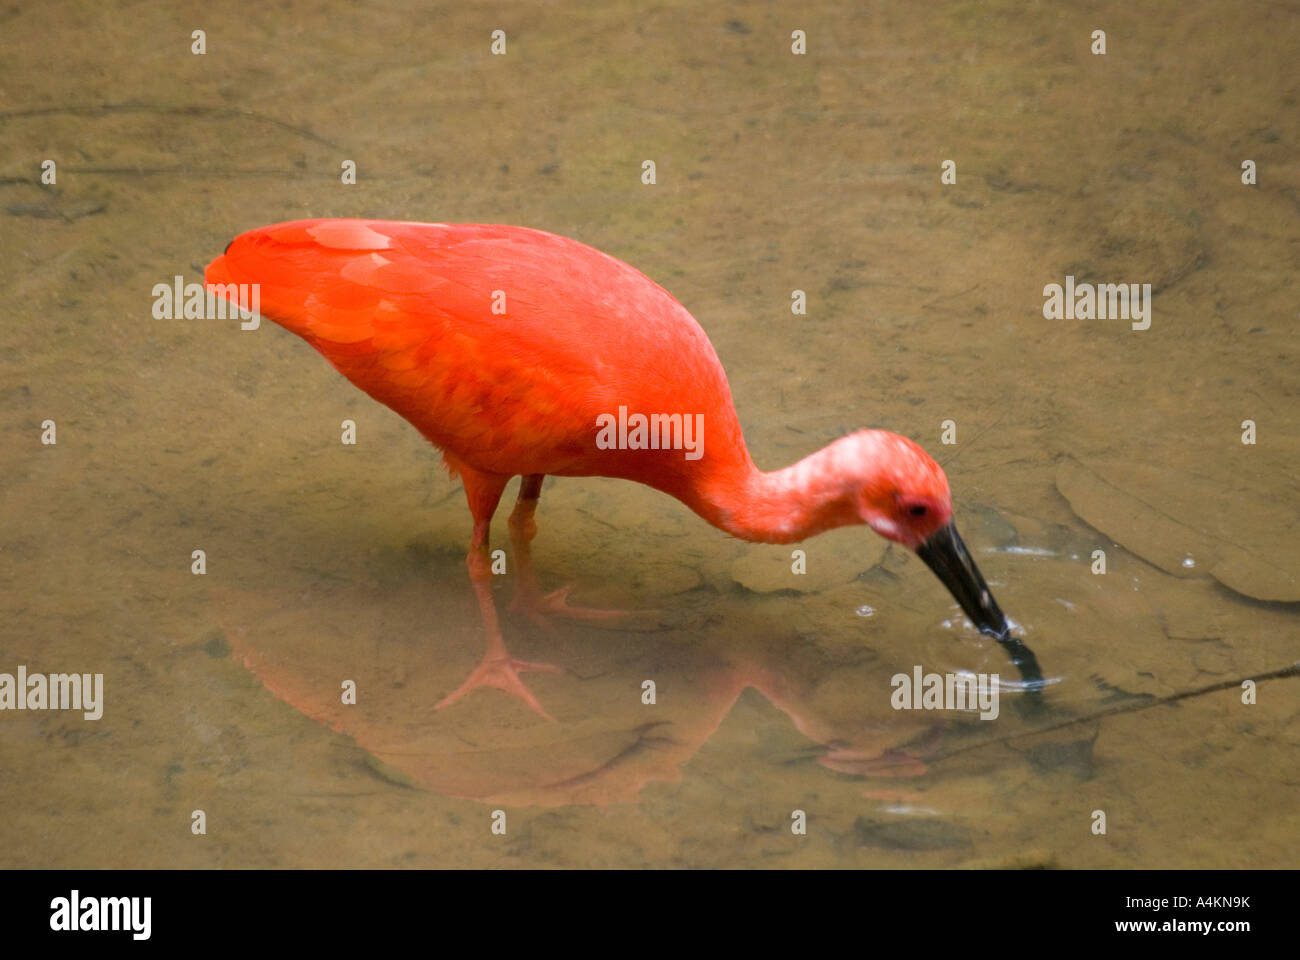 A South American, Scarlet ibis in the KL Bird Park in Kuala Lumpur Stock Photo